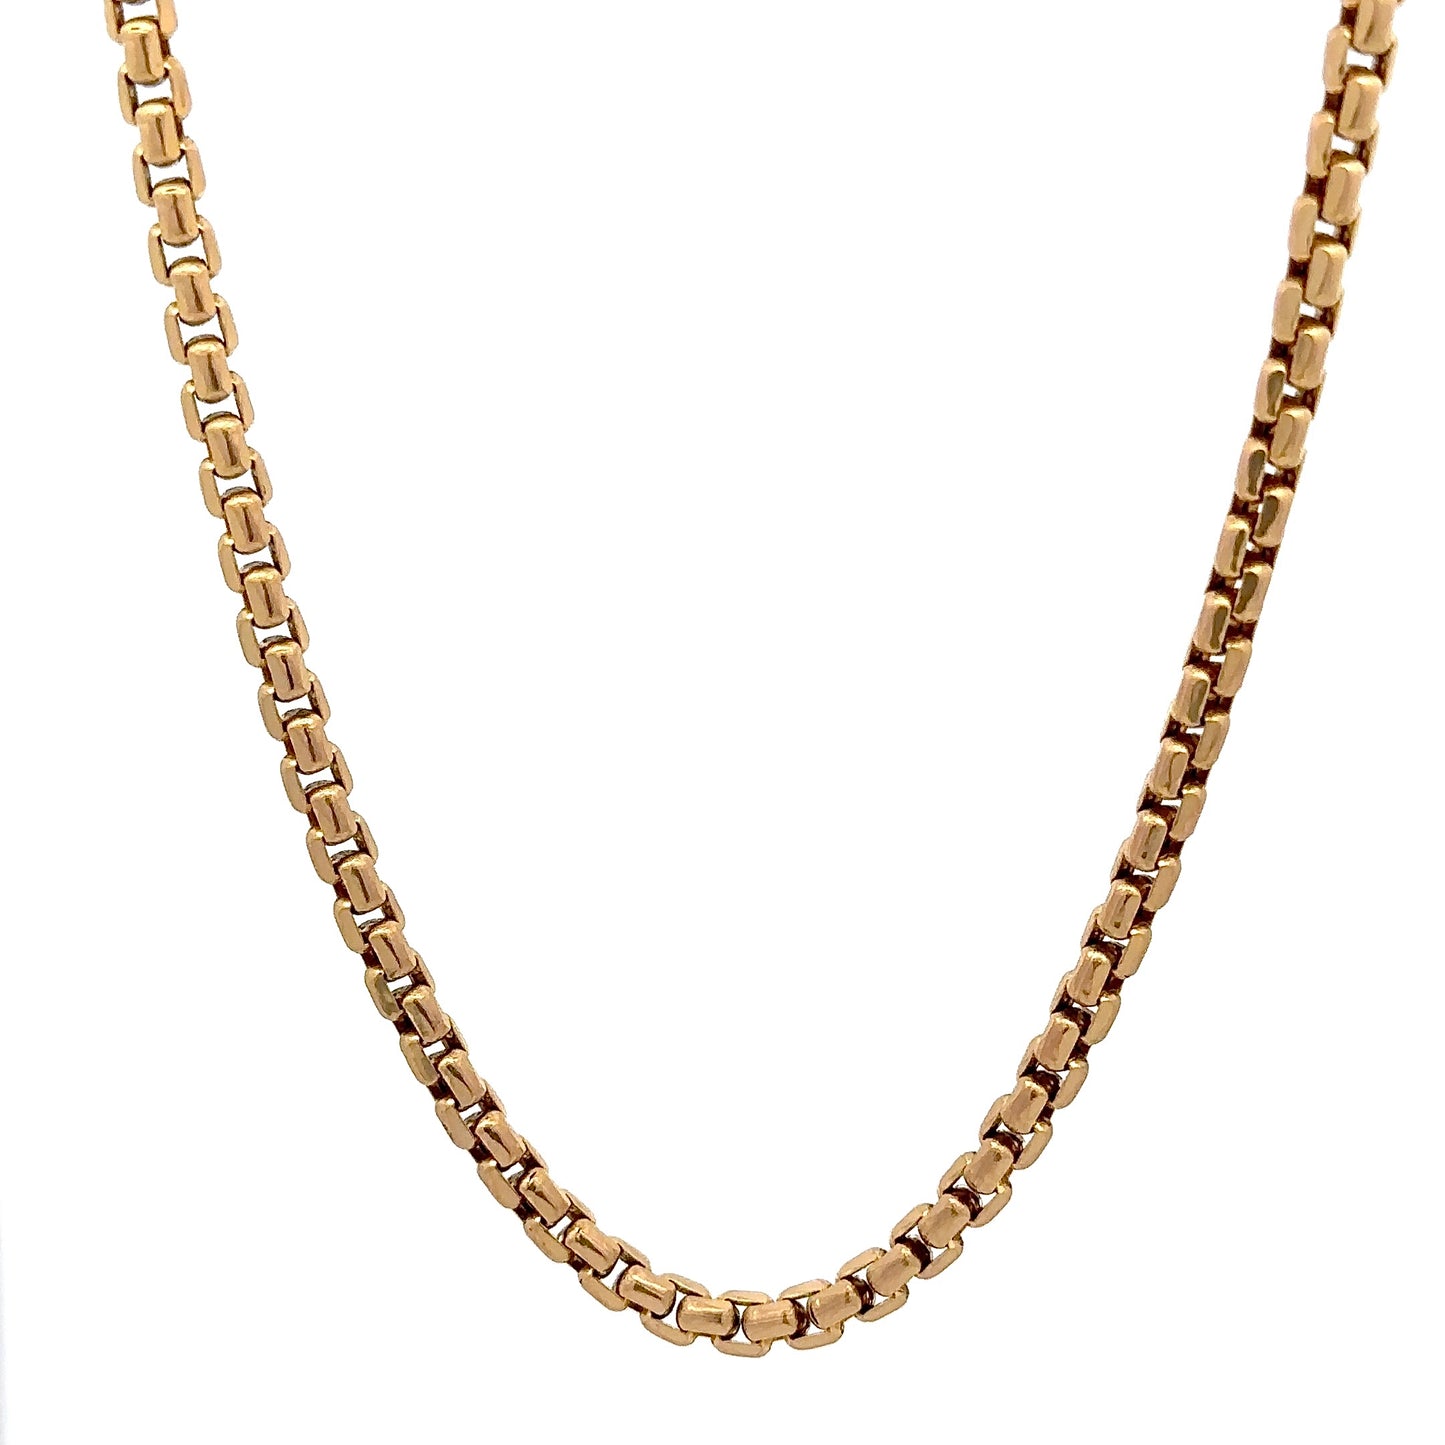 Hanging yellow gold rolo chain